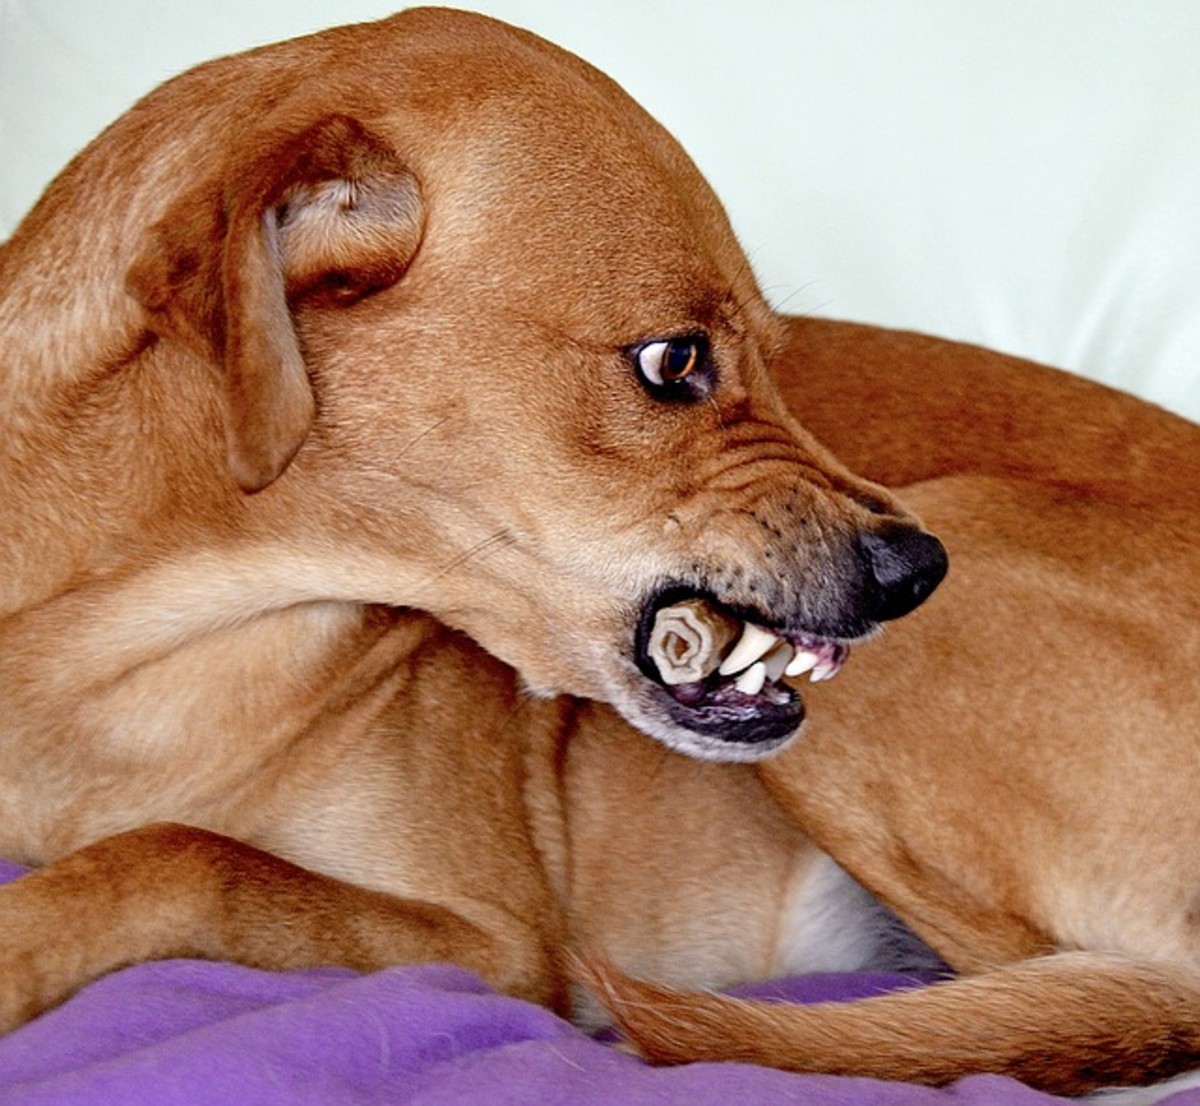 This dog with a bone in the mouth, whale eyes and baring teeth is clearly saying "stay away."